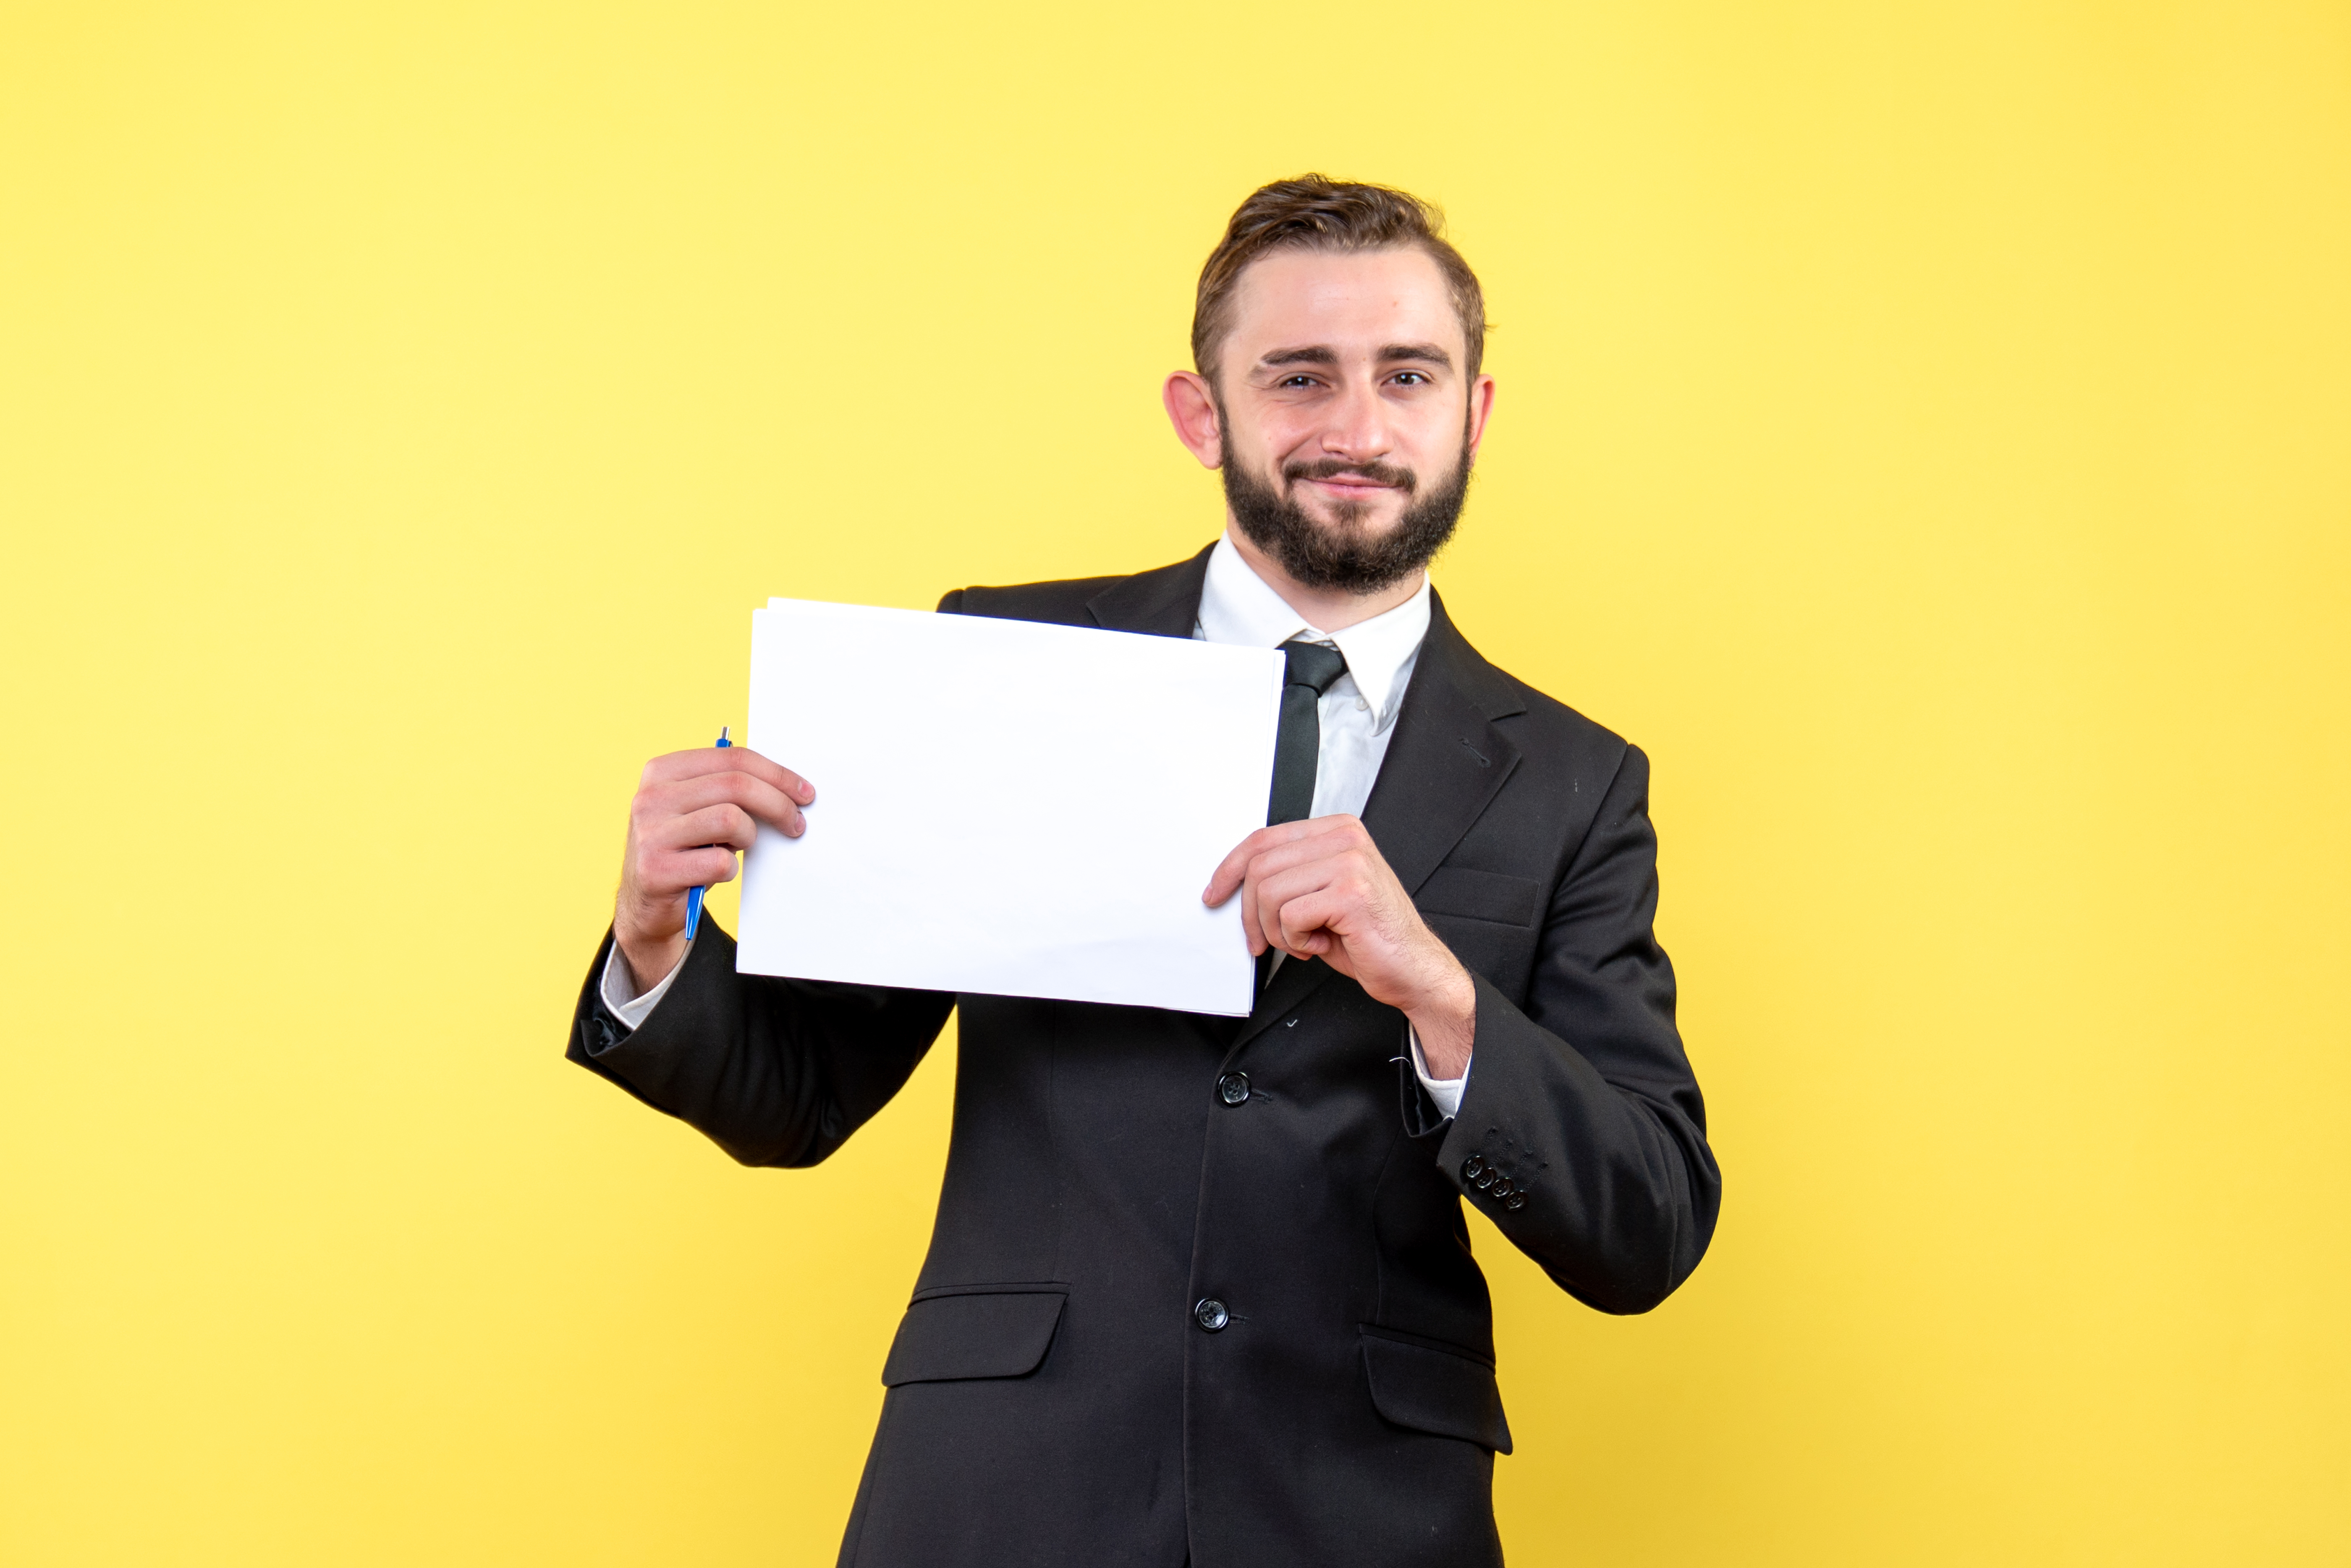 Man holding a blank white paper.